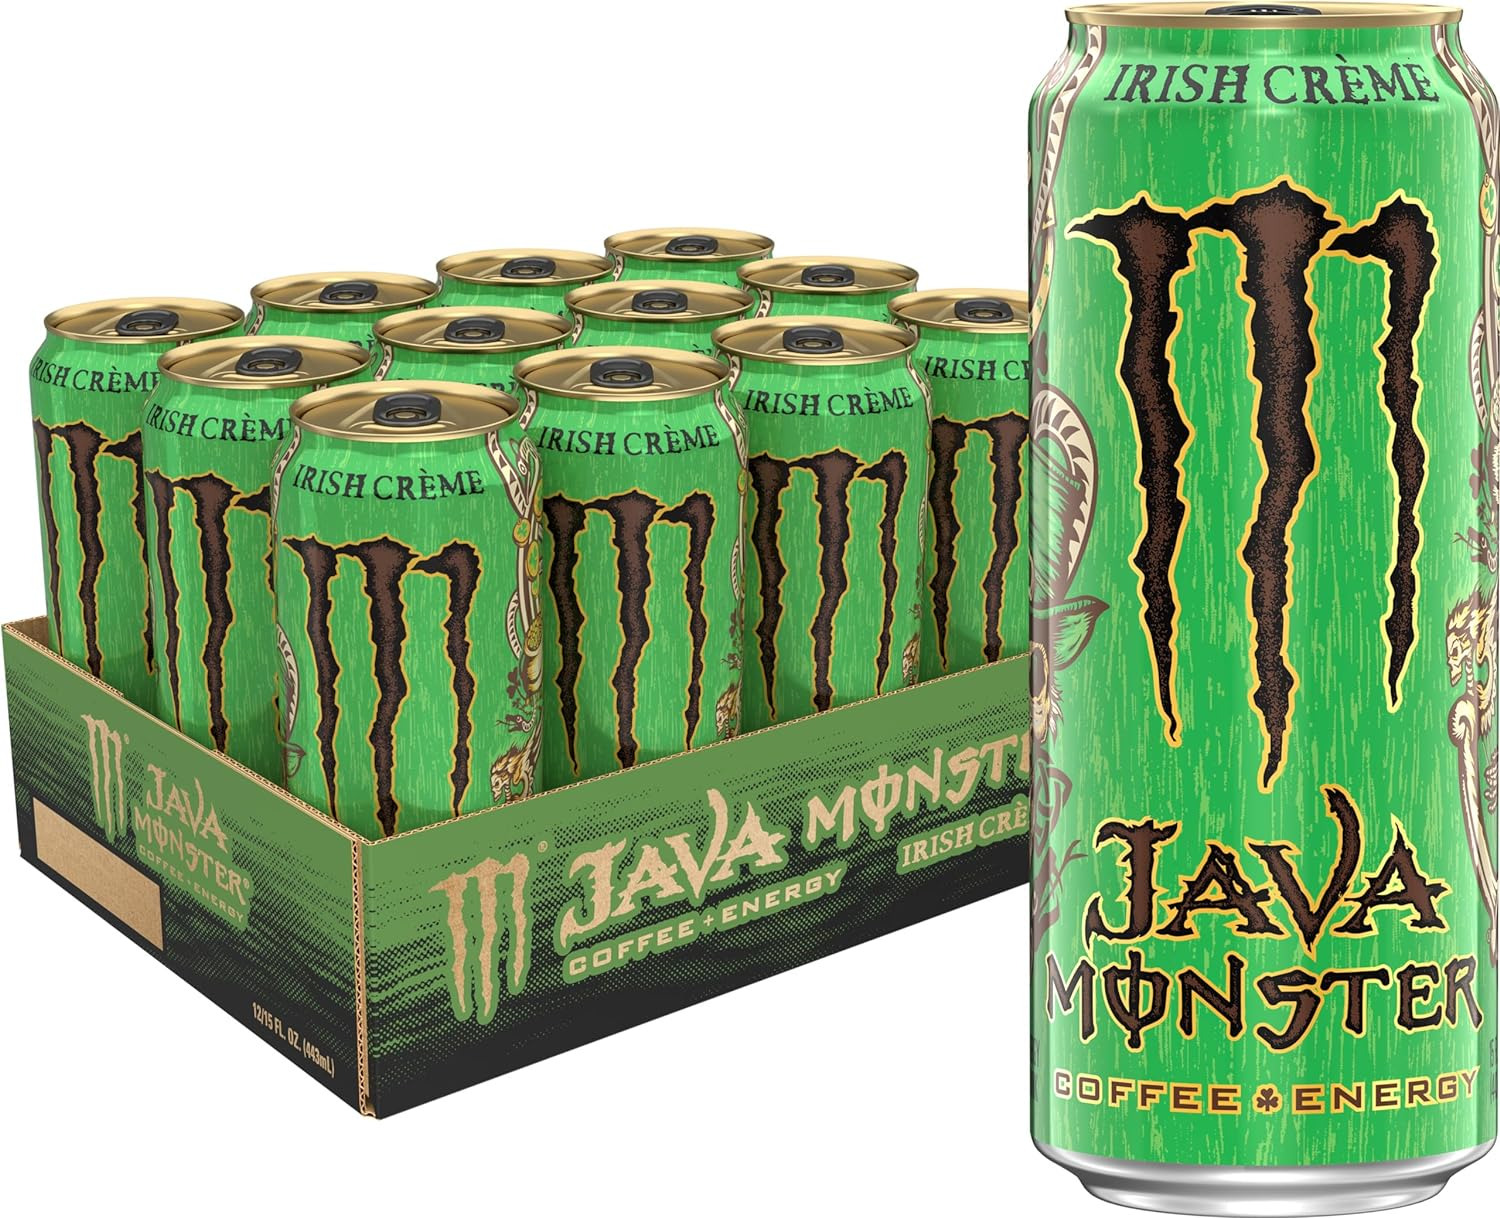 Java Monster Irish Creme, Coffee + Energy Drink, 15 Ounce Pack of 12